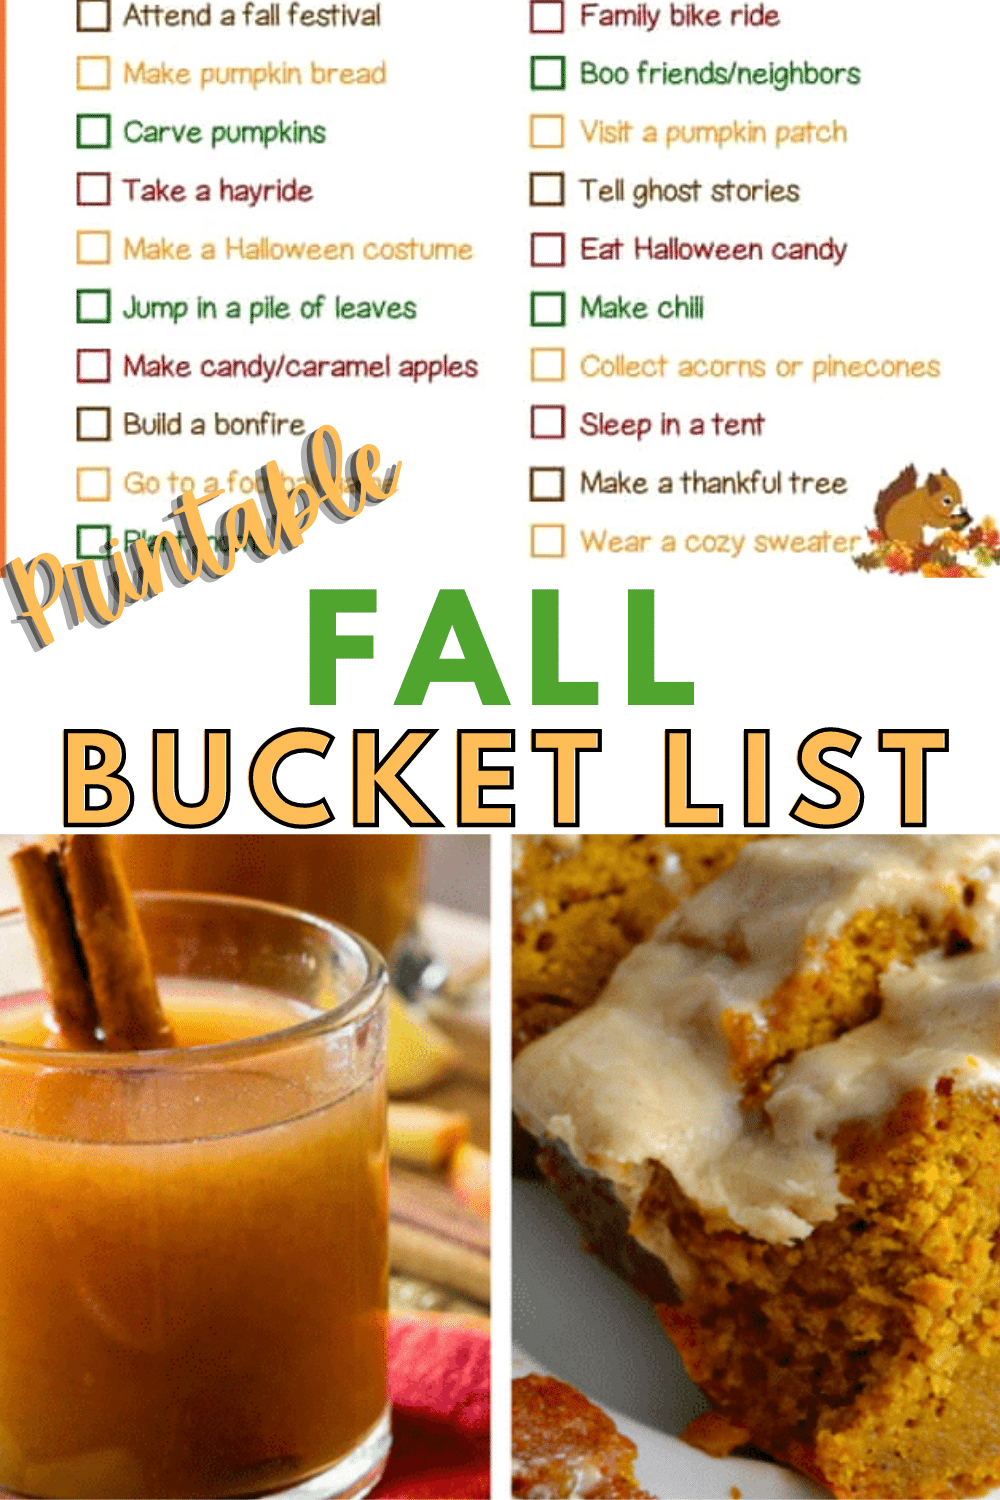 This fall bucket list includes all of the fun activities that make fall a wonderful season. It's the perfect way to get out and enjoy the season as a family. #printable #fall #fallactivities #bucketlist via @wondermomwannab